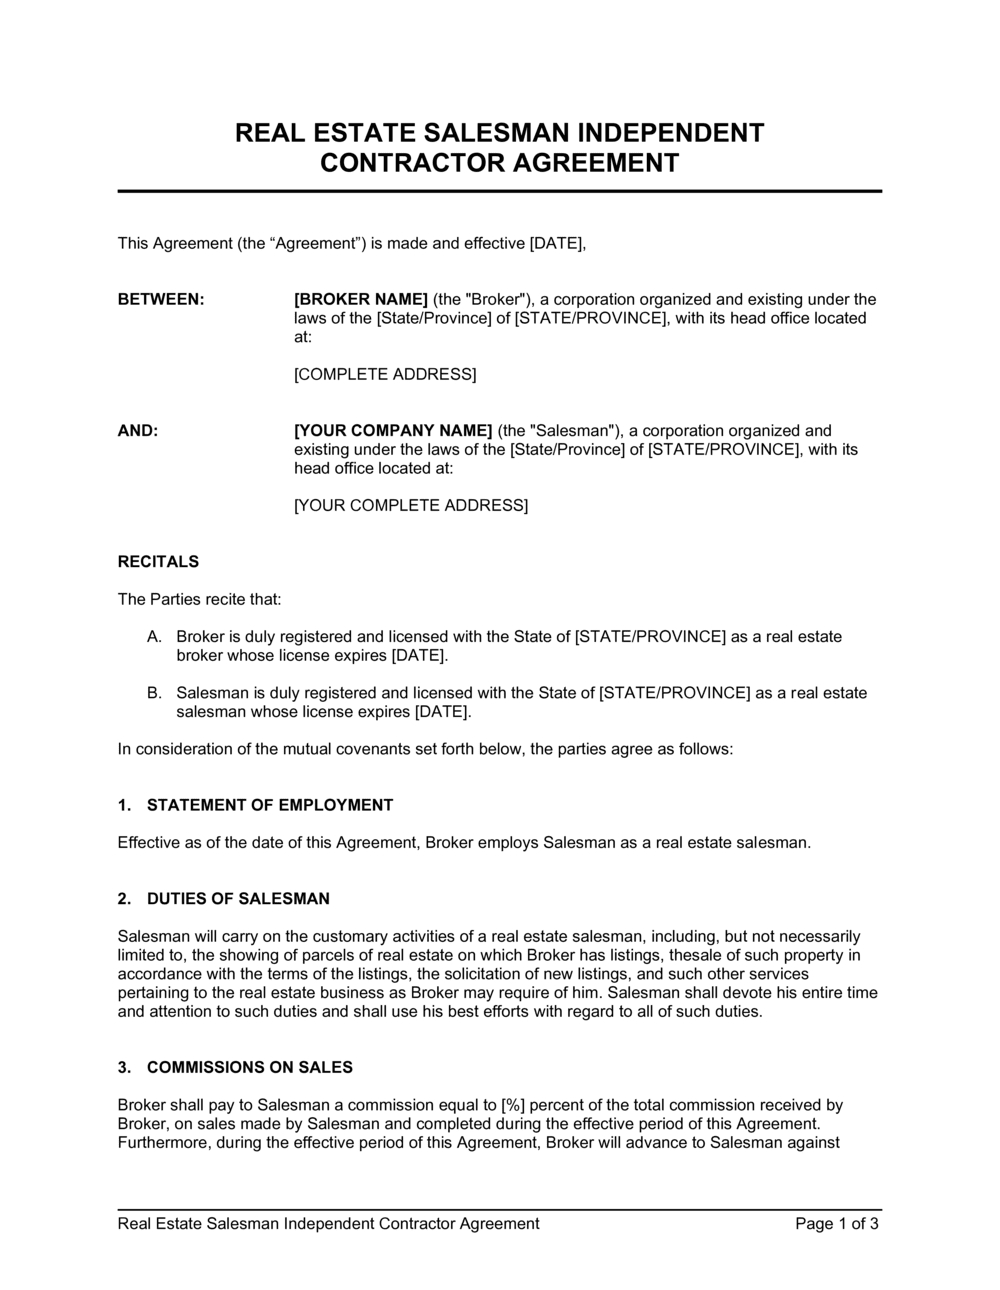 Real Estate Salesman Independent Contractor Agreement Template | with regard to Independent Contractor Commission Agreement Template